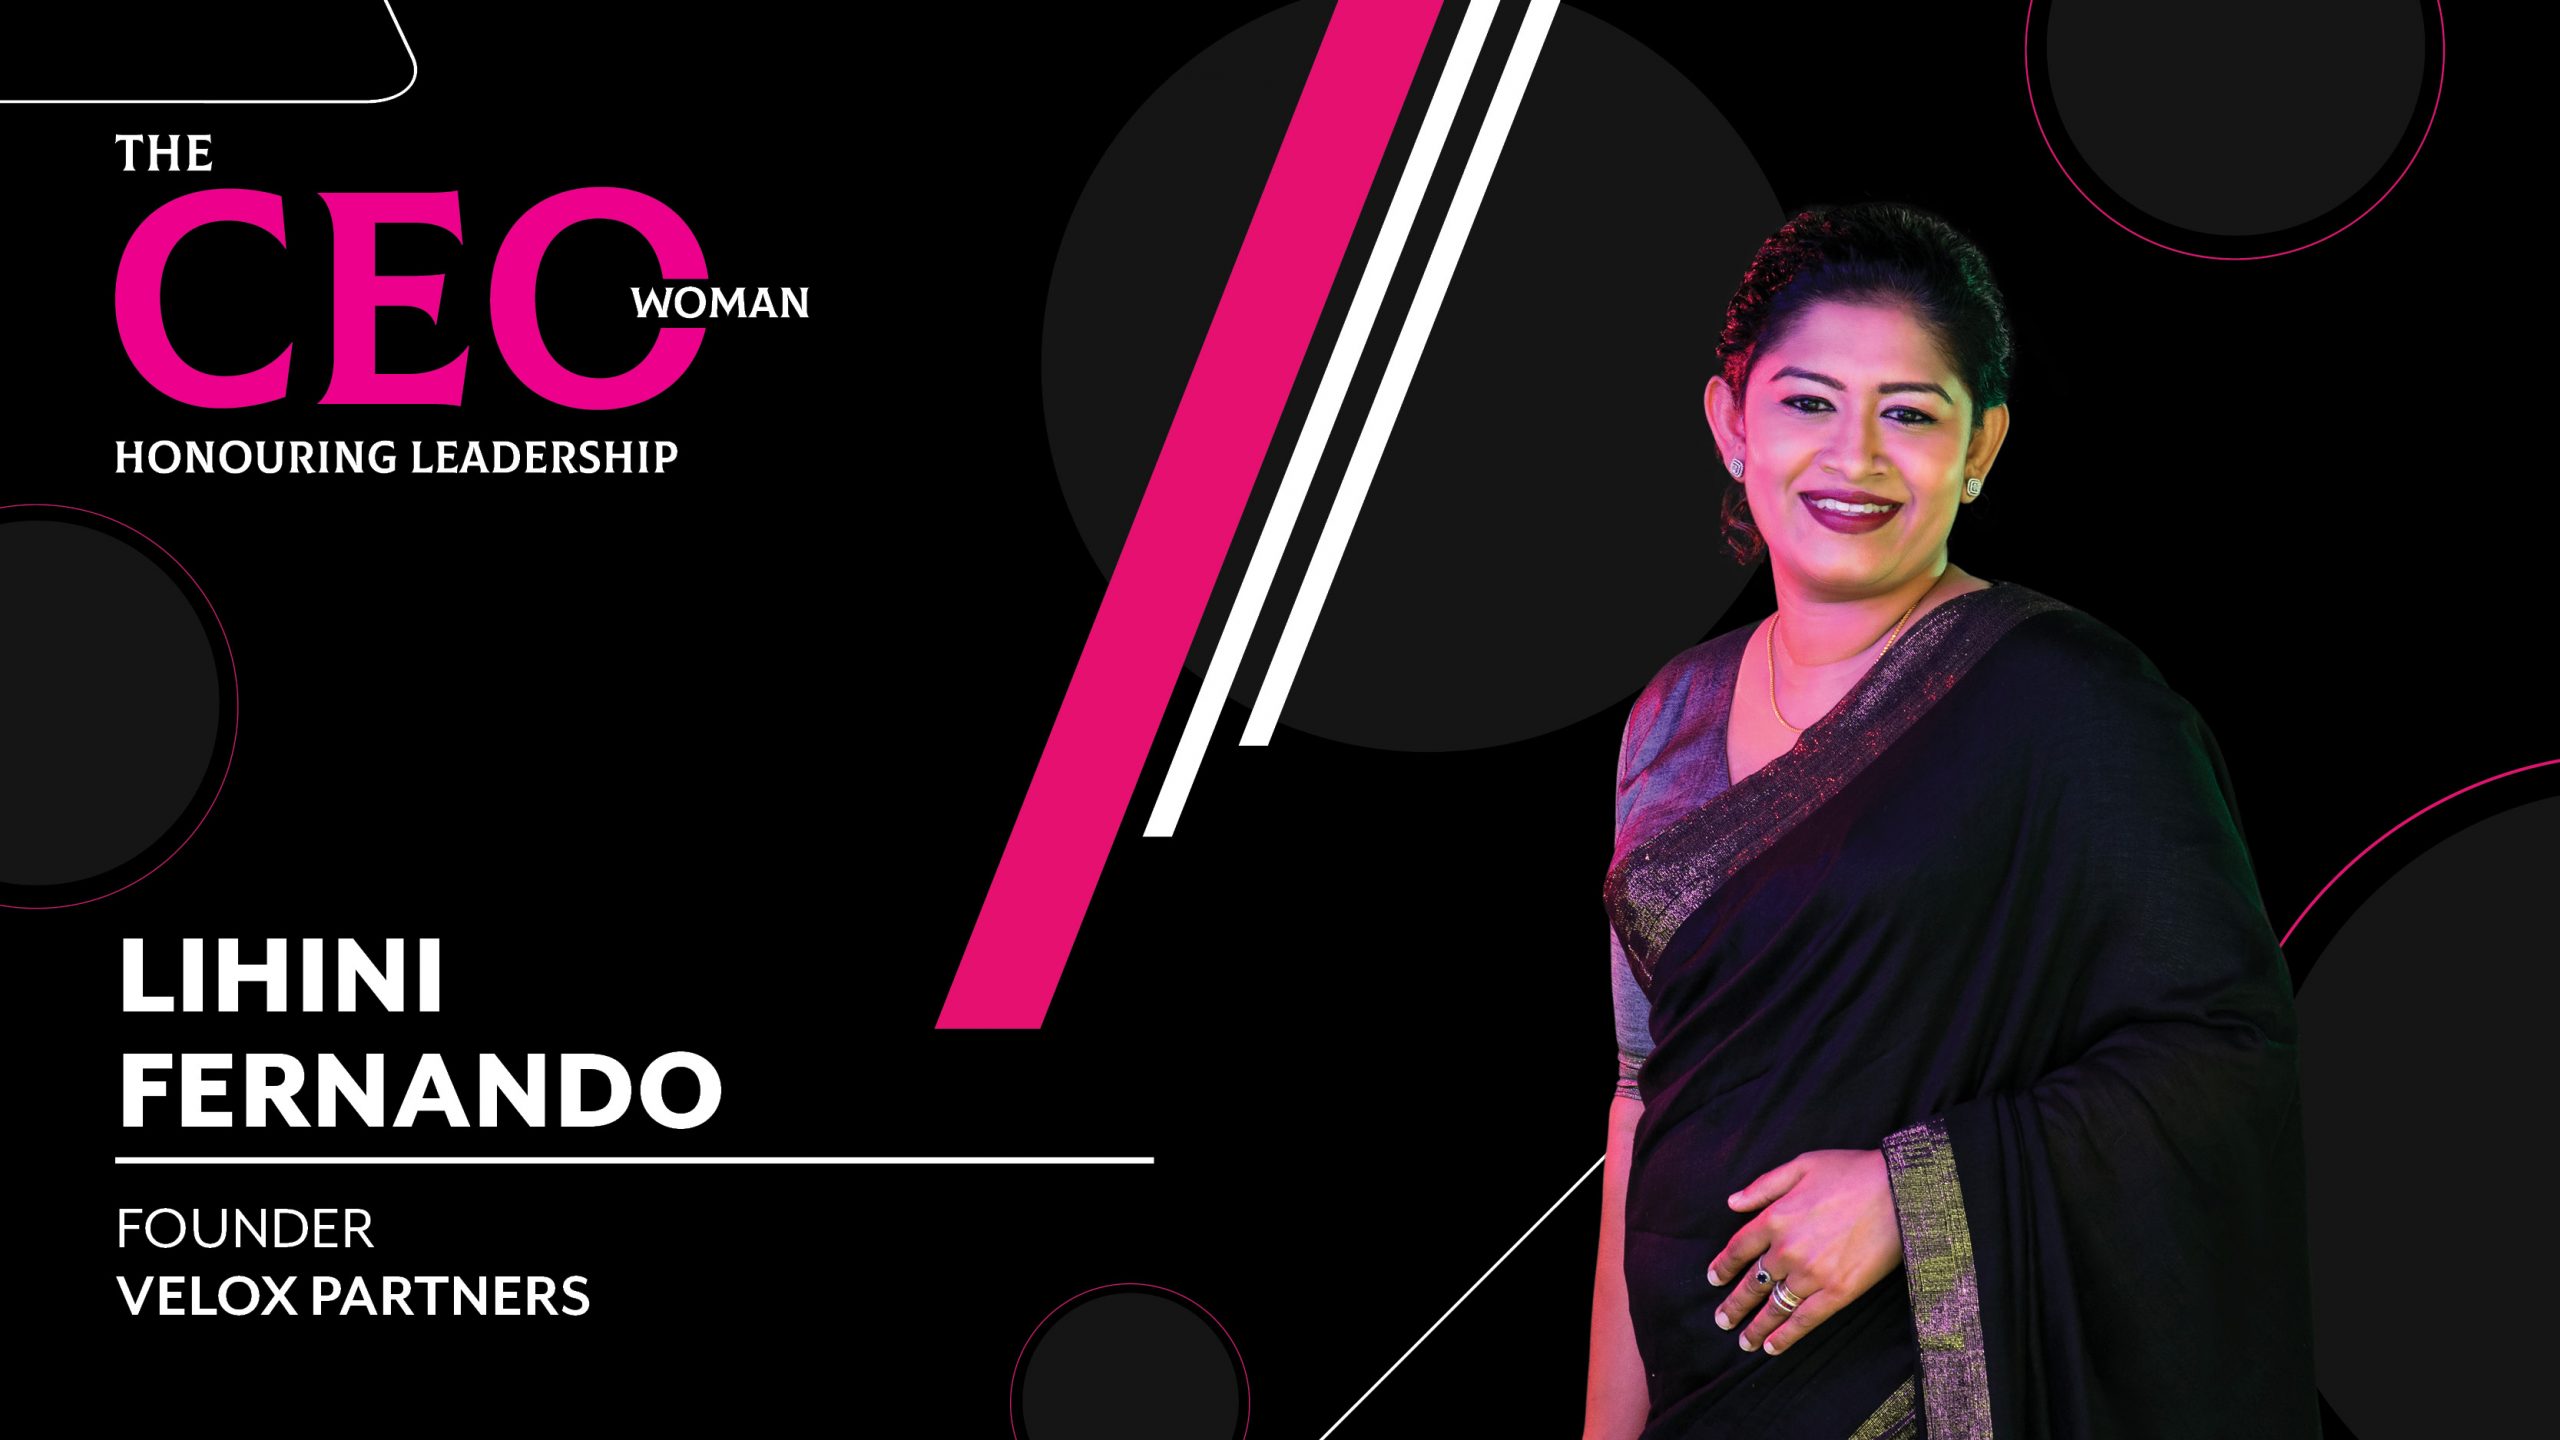 Paving the Way to a Worthwhile Change – the Founder of Velox Partners, Lihini Fernando